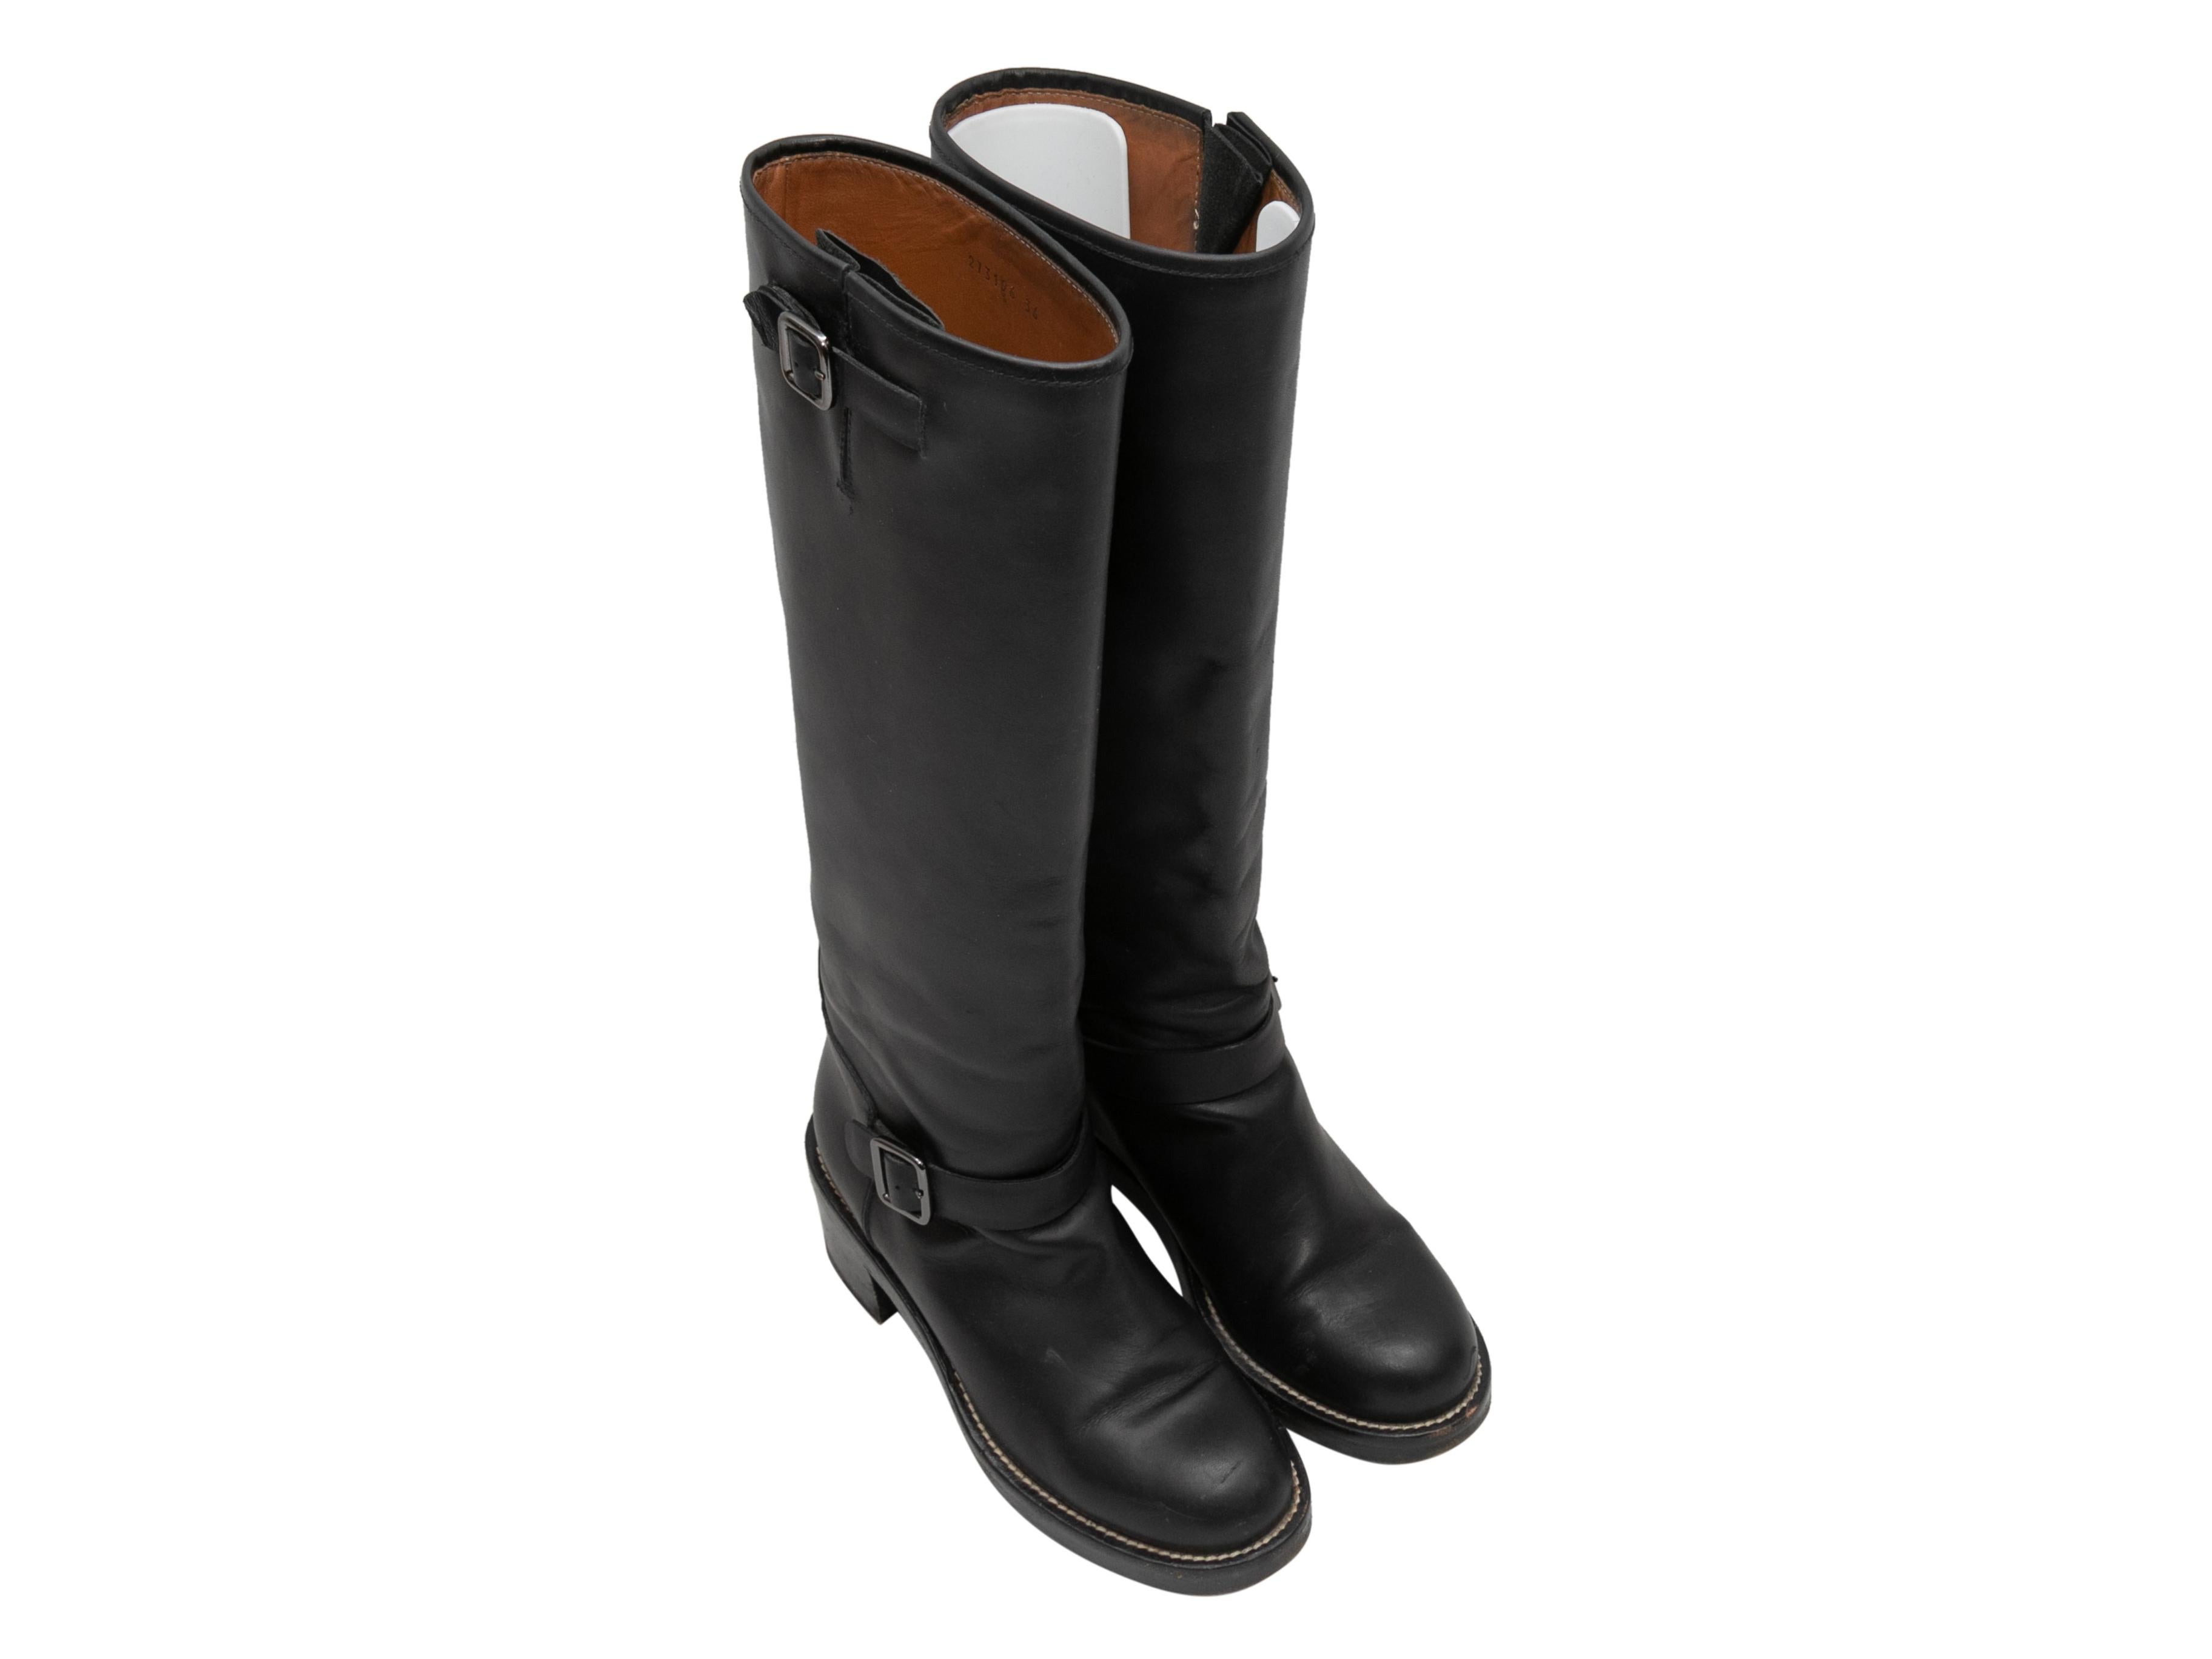 Black leather tall knee-high boots by Balenciaga. Buckle accents at sides. Stacked heels. 14.5